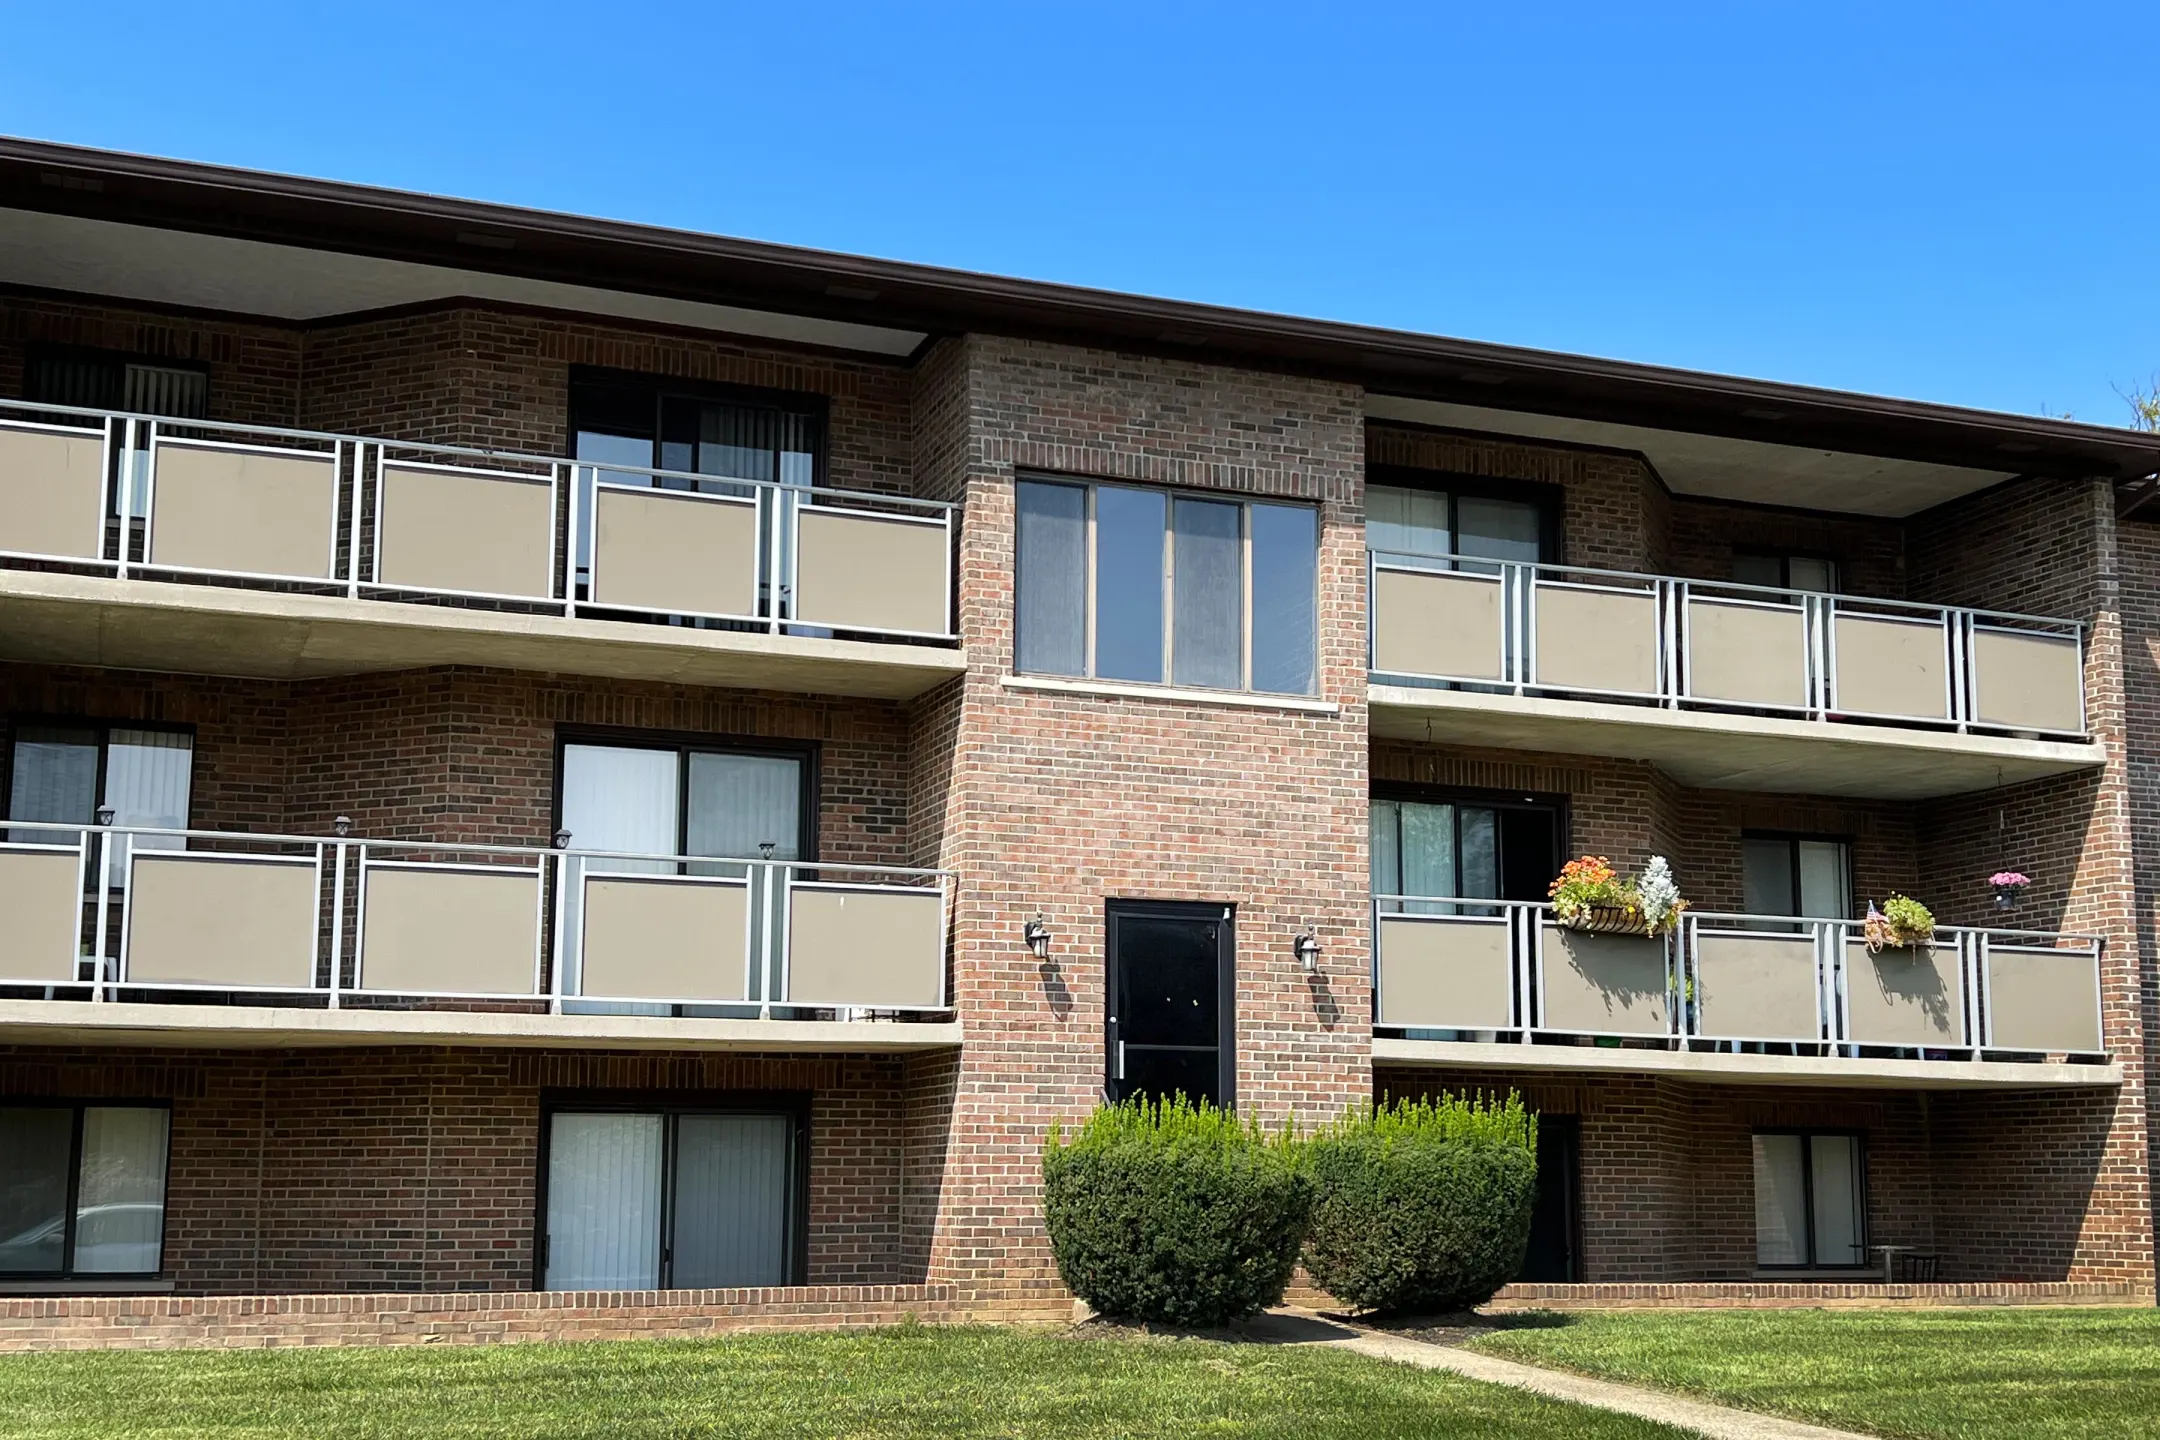 Building - Colonial Village Apartments - Crescent Springs, KY